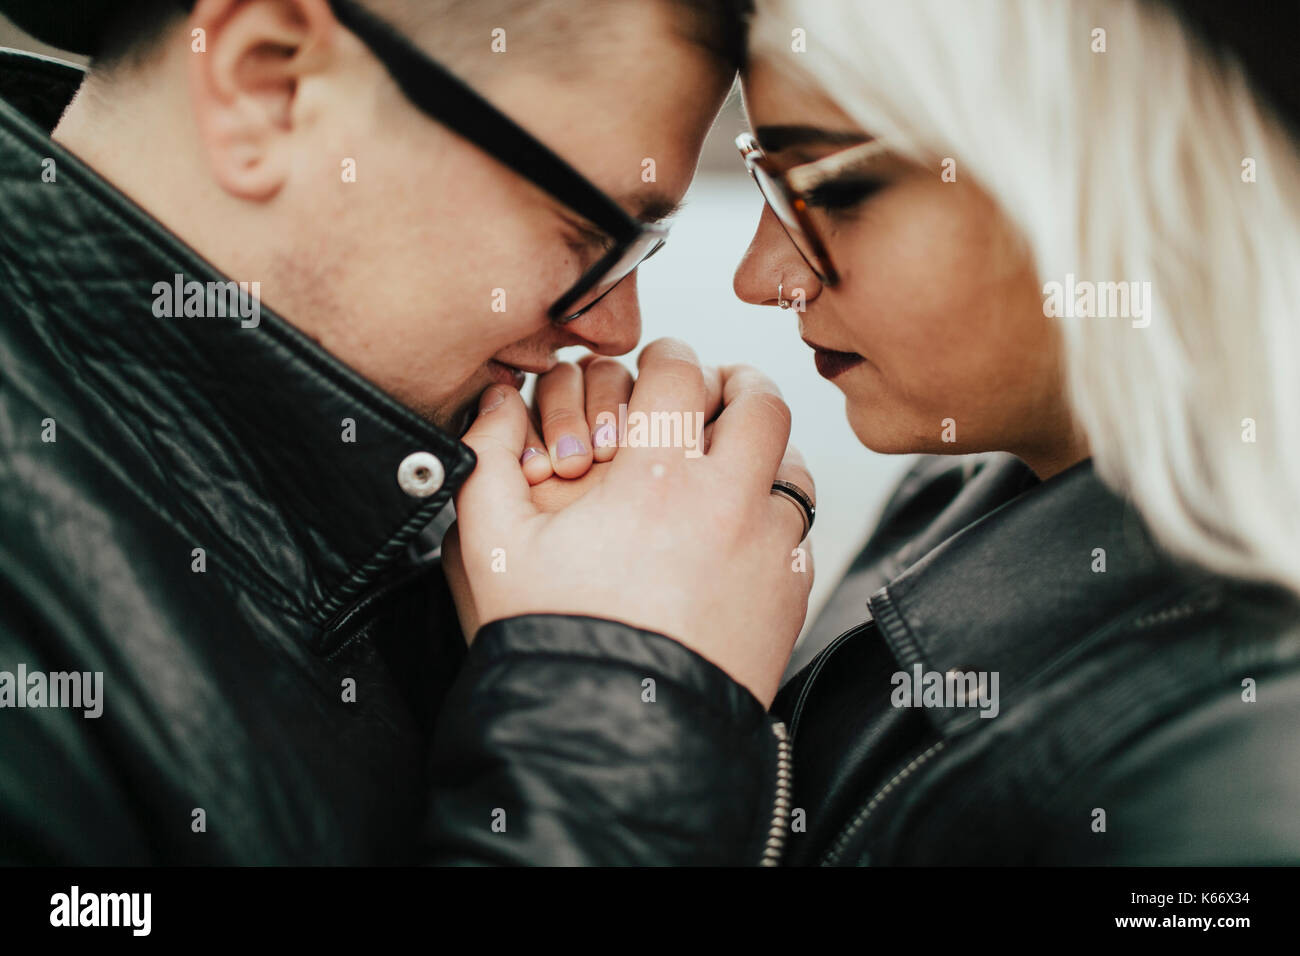 Affectionate Middle Eastern couple holding hands Stock Photo